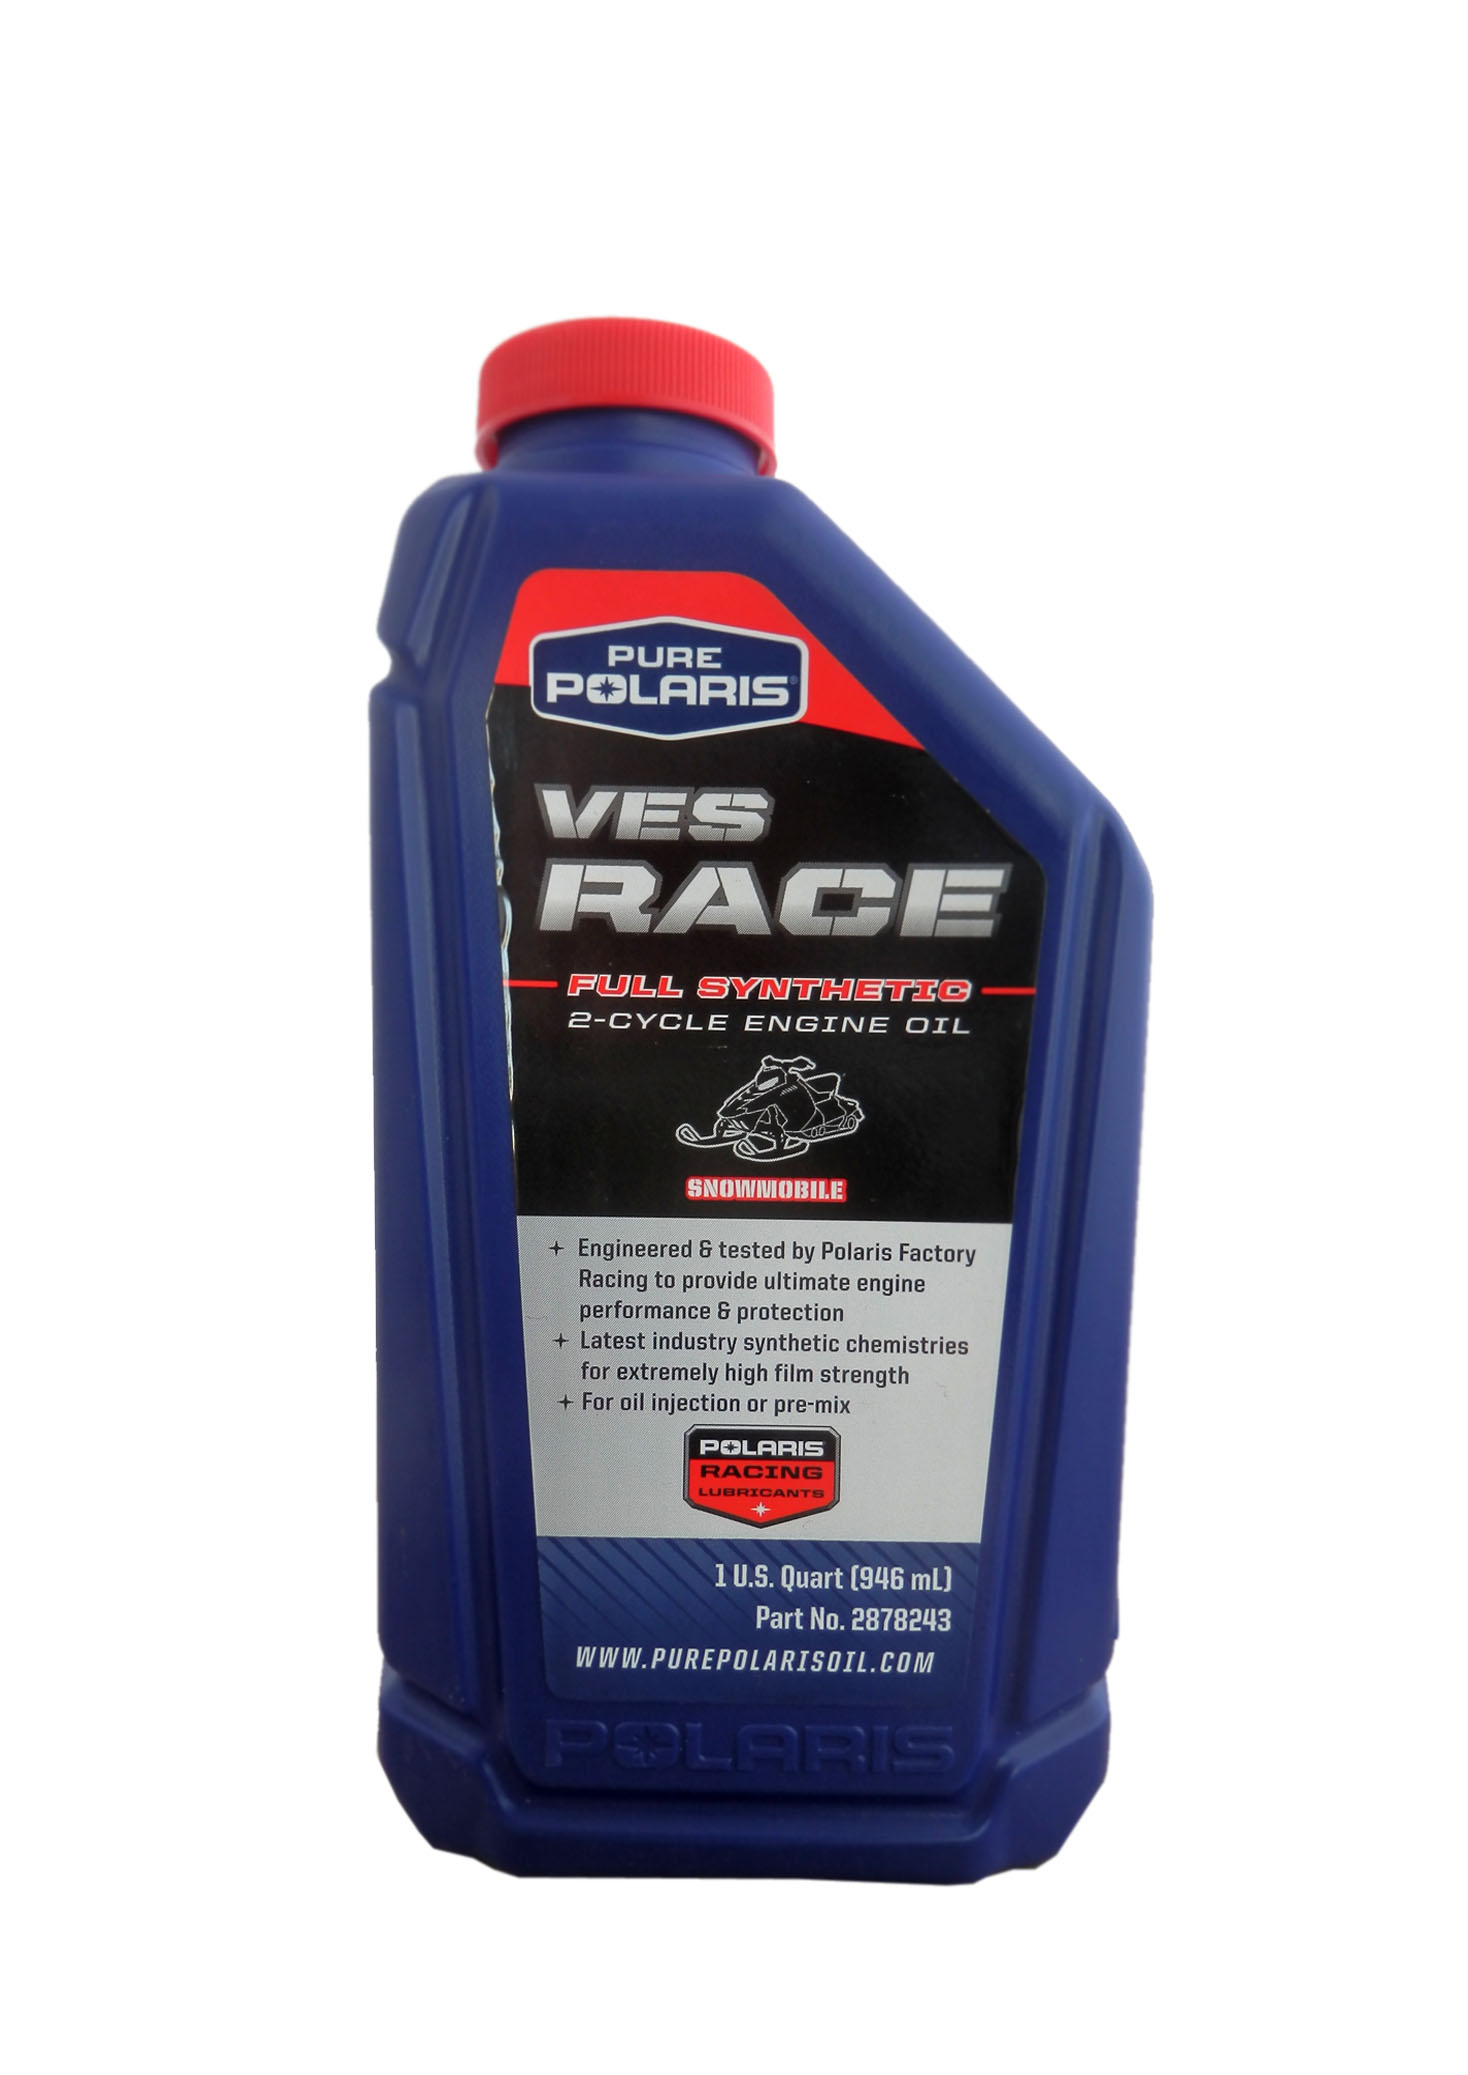 Моторное масло Polaris 2878243 VES Race Full Synthetic 2-cycle Oil  0.946 л